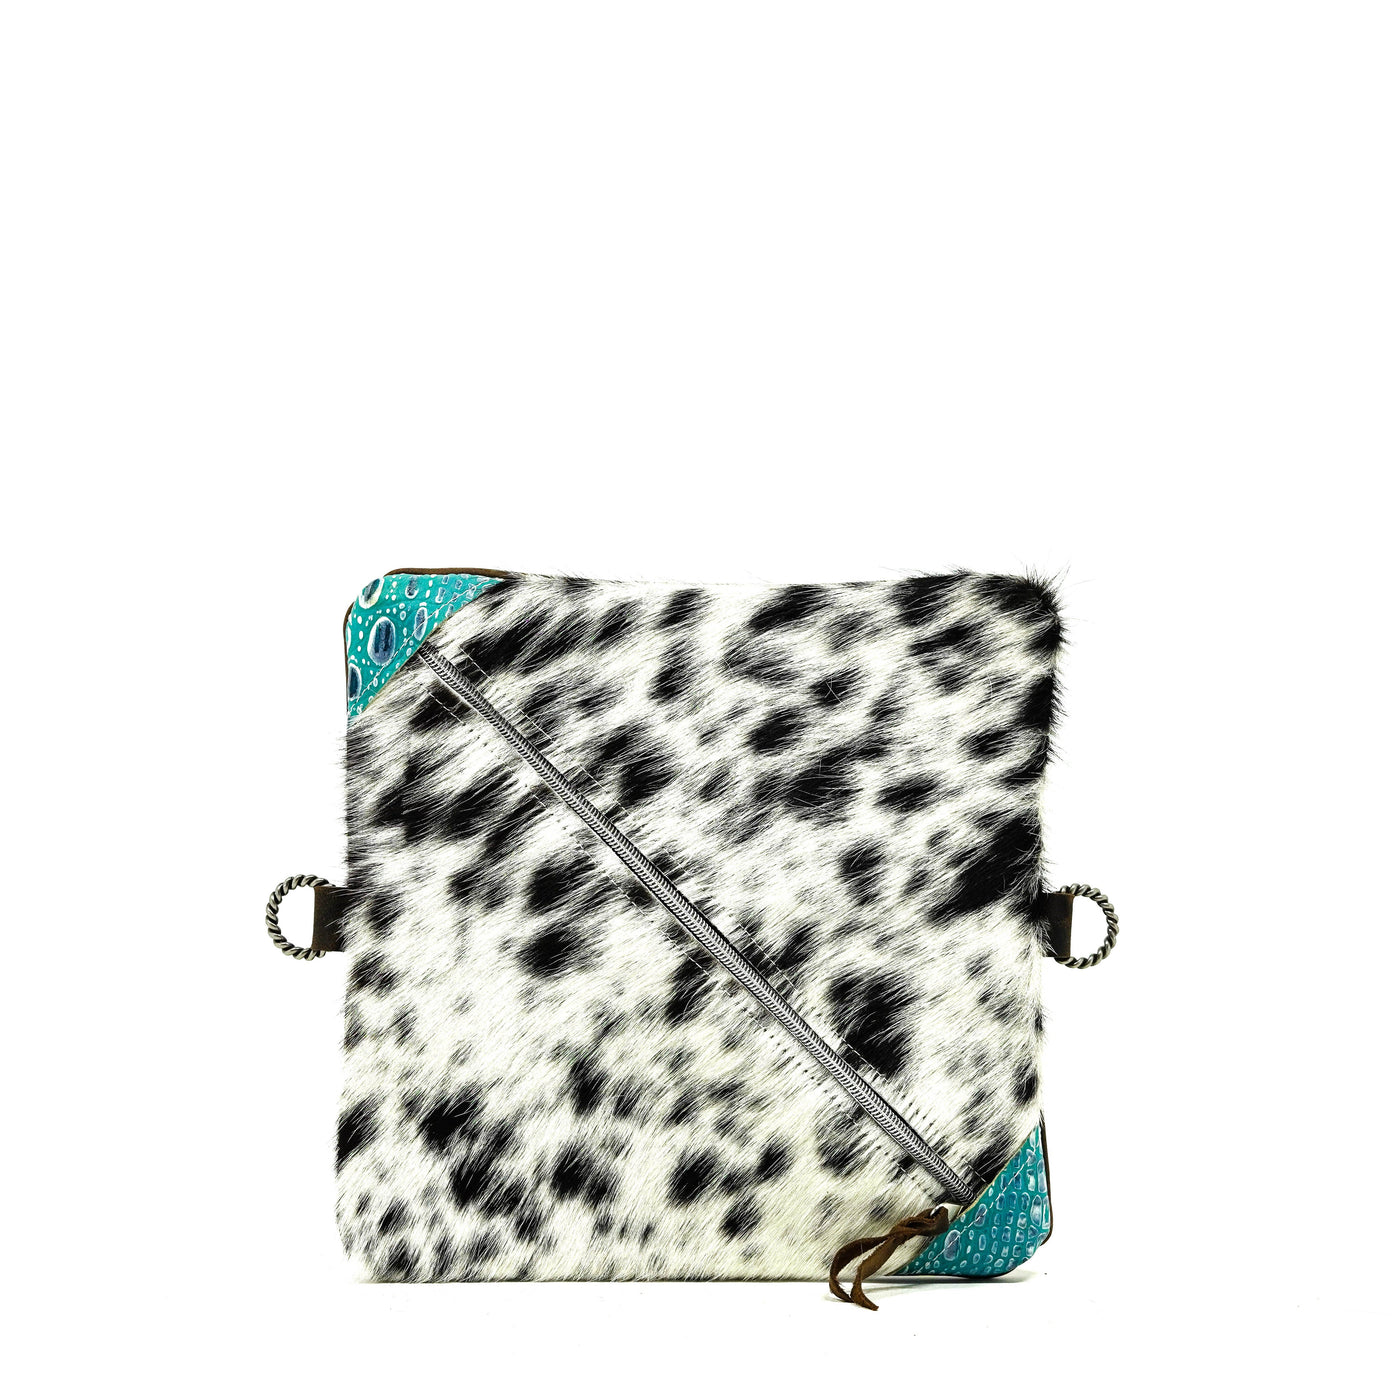 Accessory Bag - Black & White w/ Turquoise Sand Croc-Accessory Bag-Western-Cowhide-Bags-Handmade-Products-Gifts-Dancing Cactus Designs